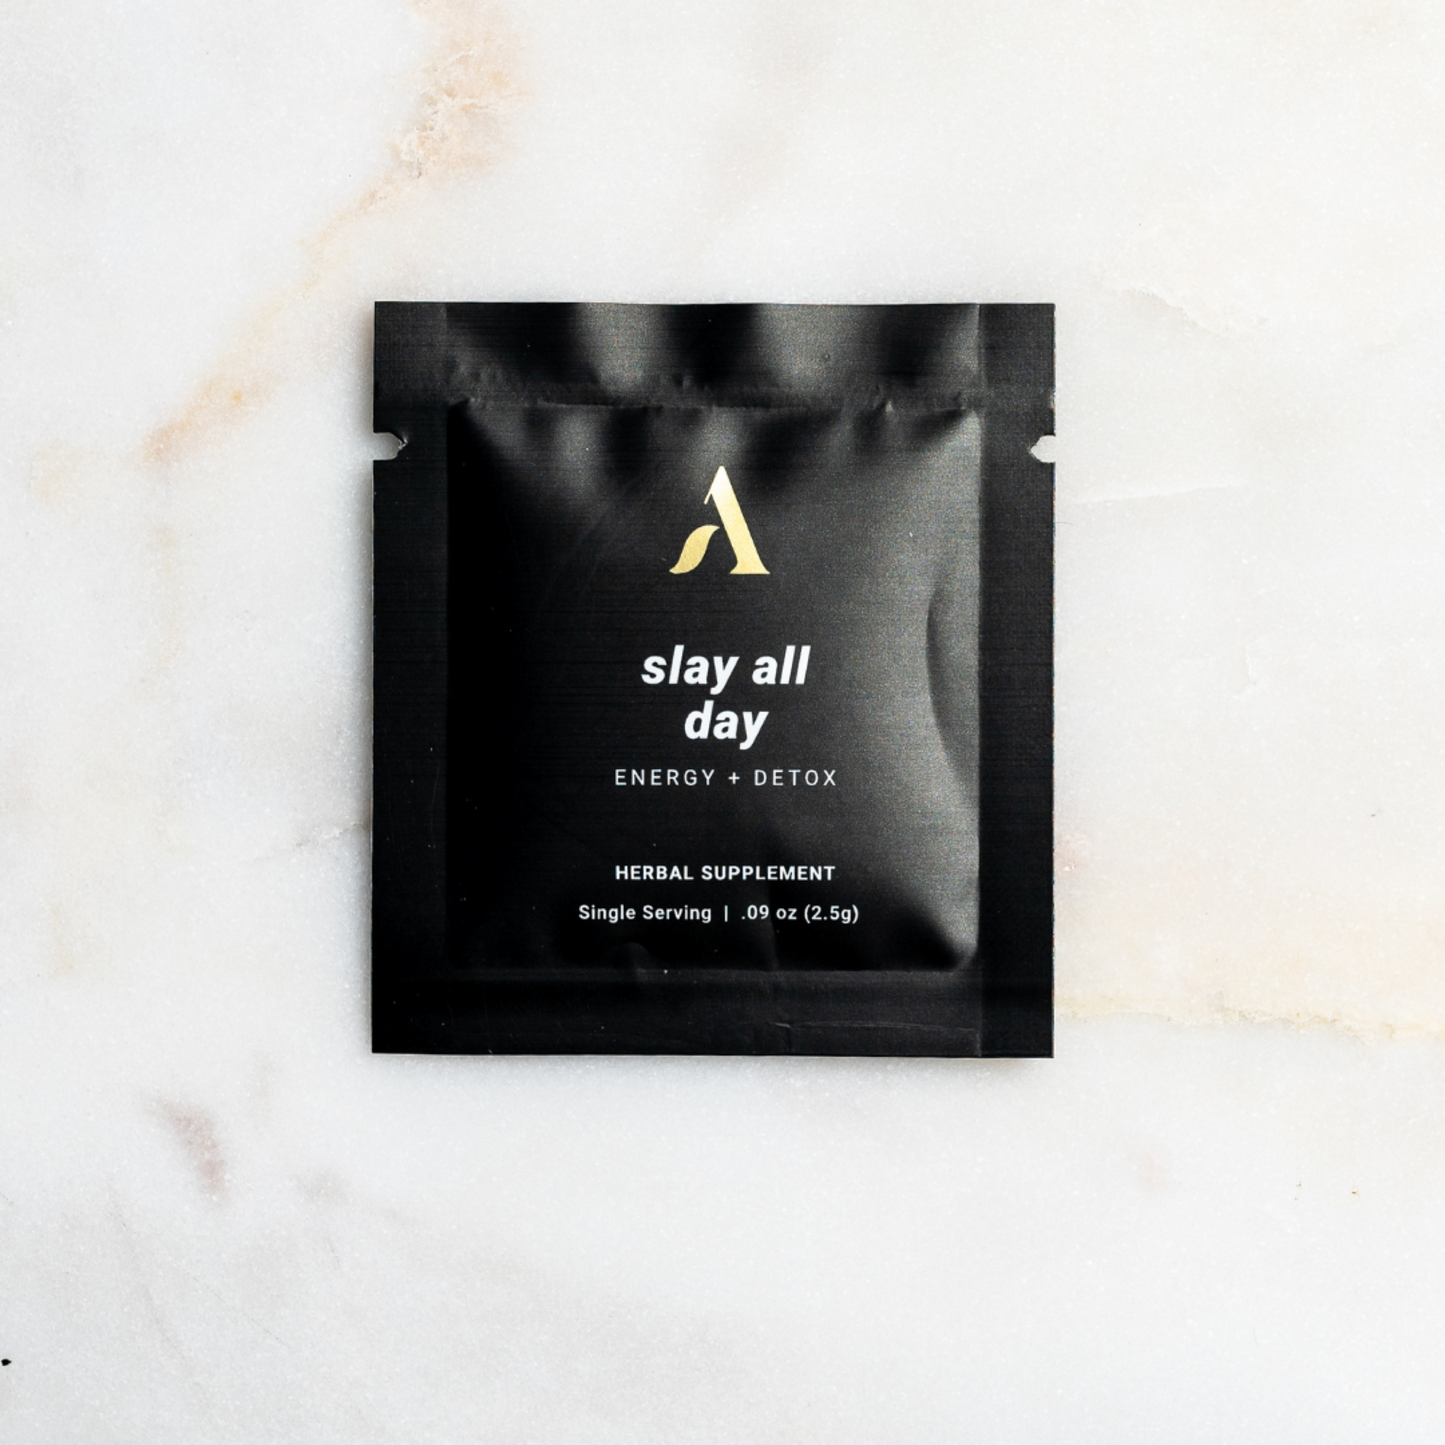 Apothekary Slay All Day, a coffee alternative for sustained energy